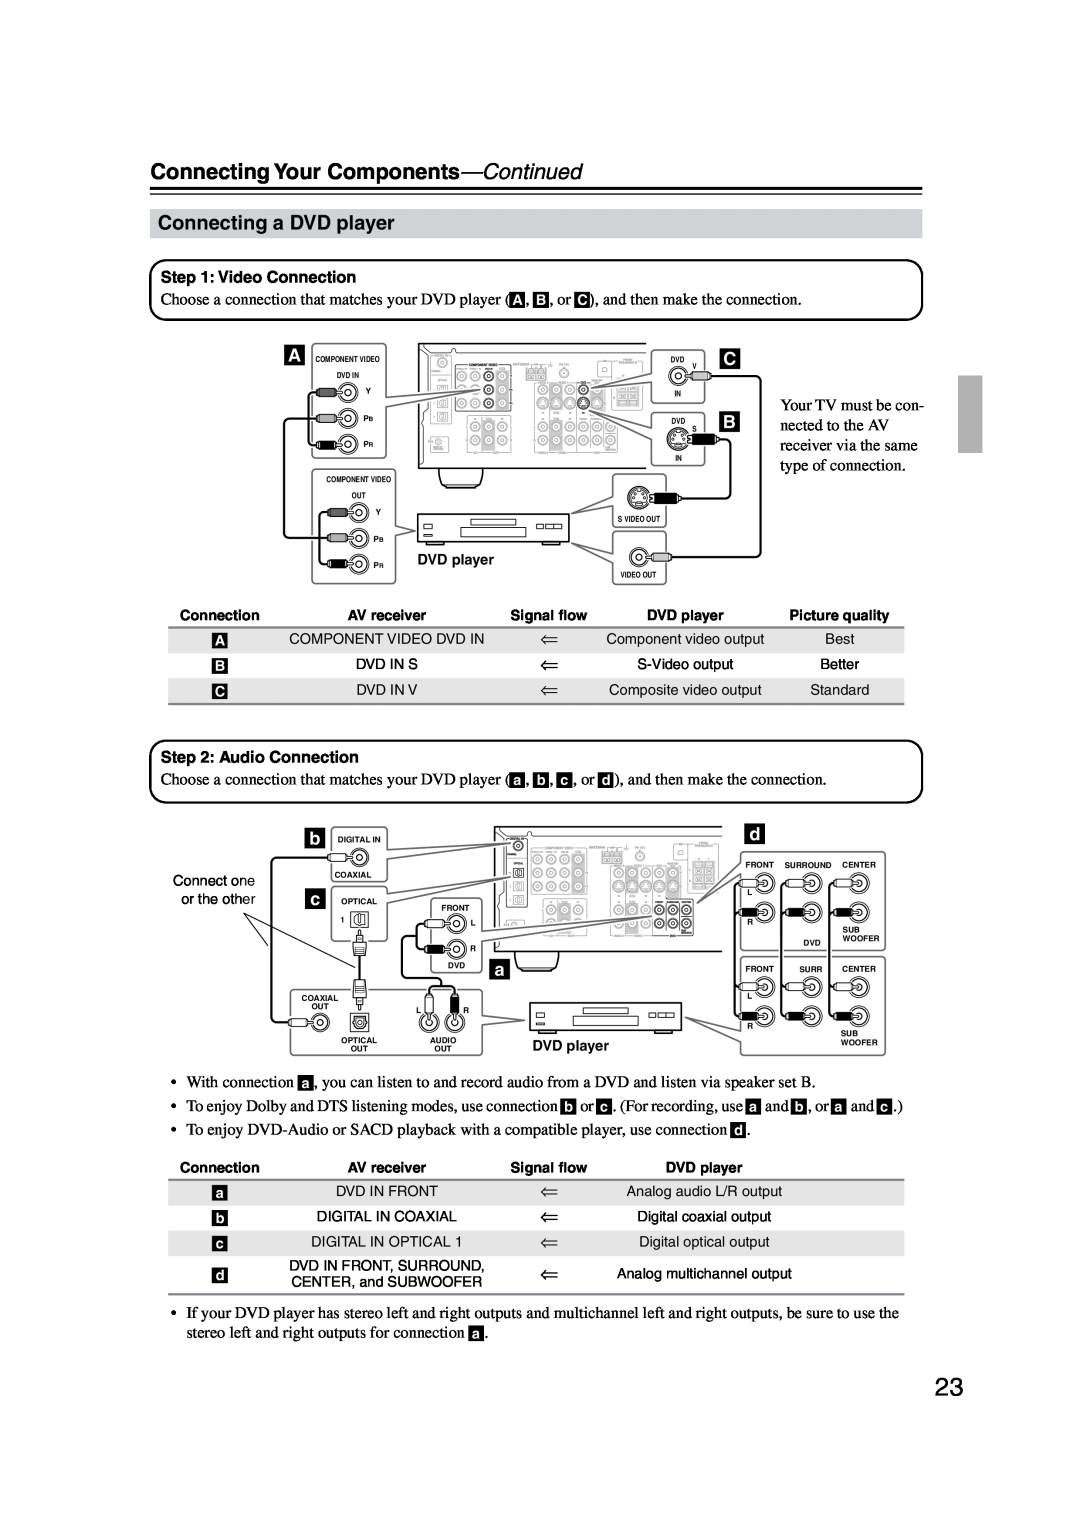 Onkyo TX-SR573 instruction manual Connecting a DVD player, Connecting Your Components—Continued 